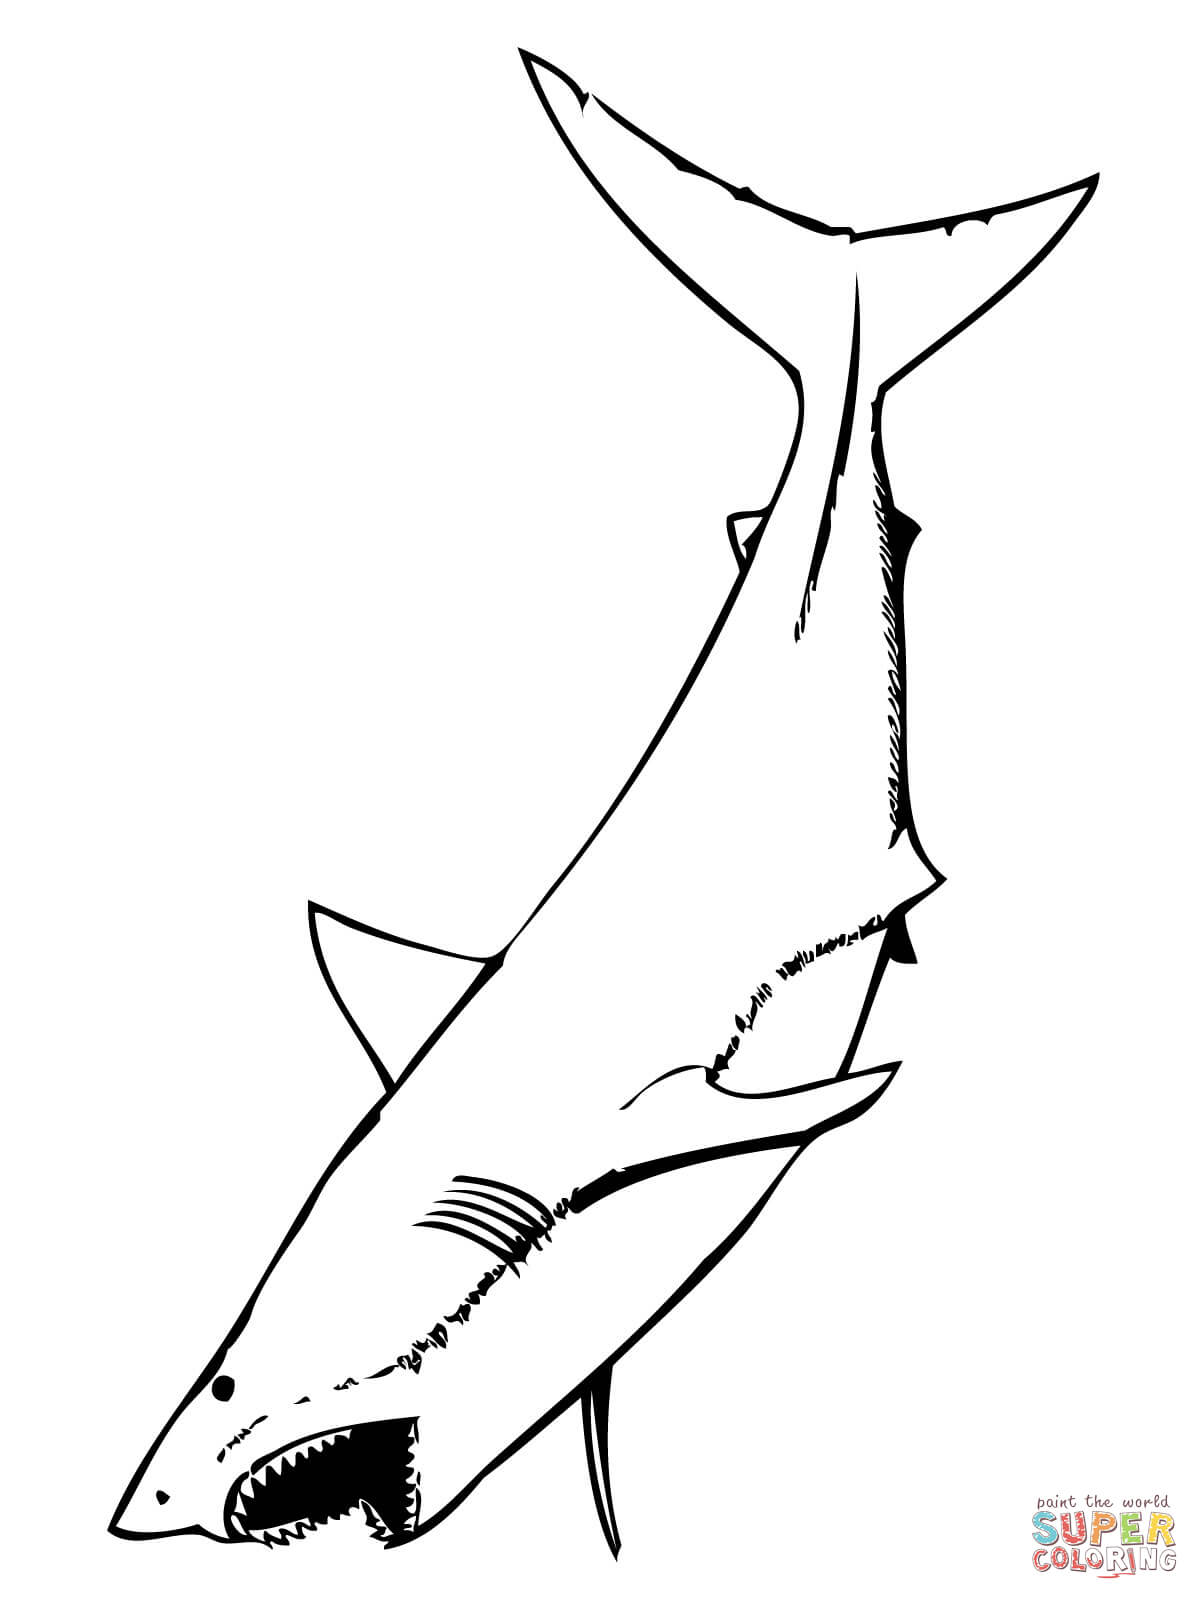 Shark black and white great white shark with mouth open coloring page free printable